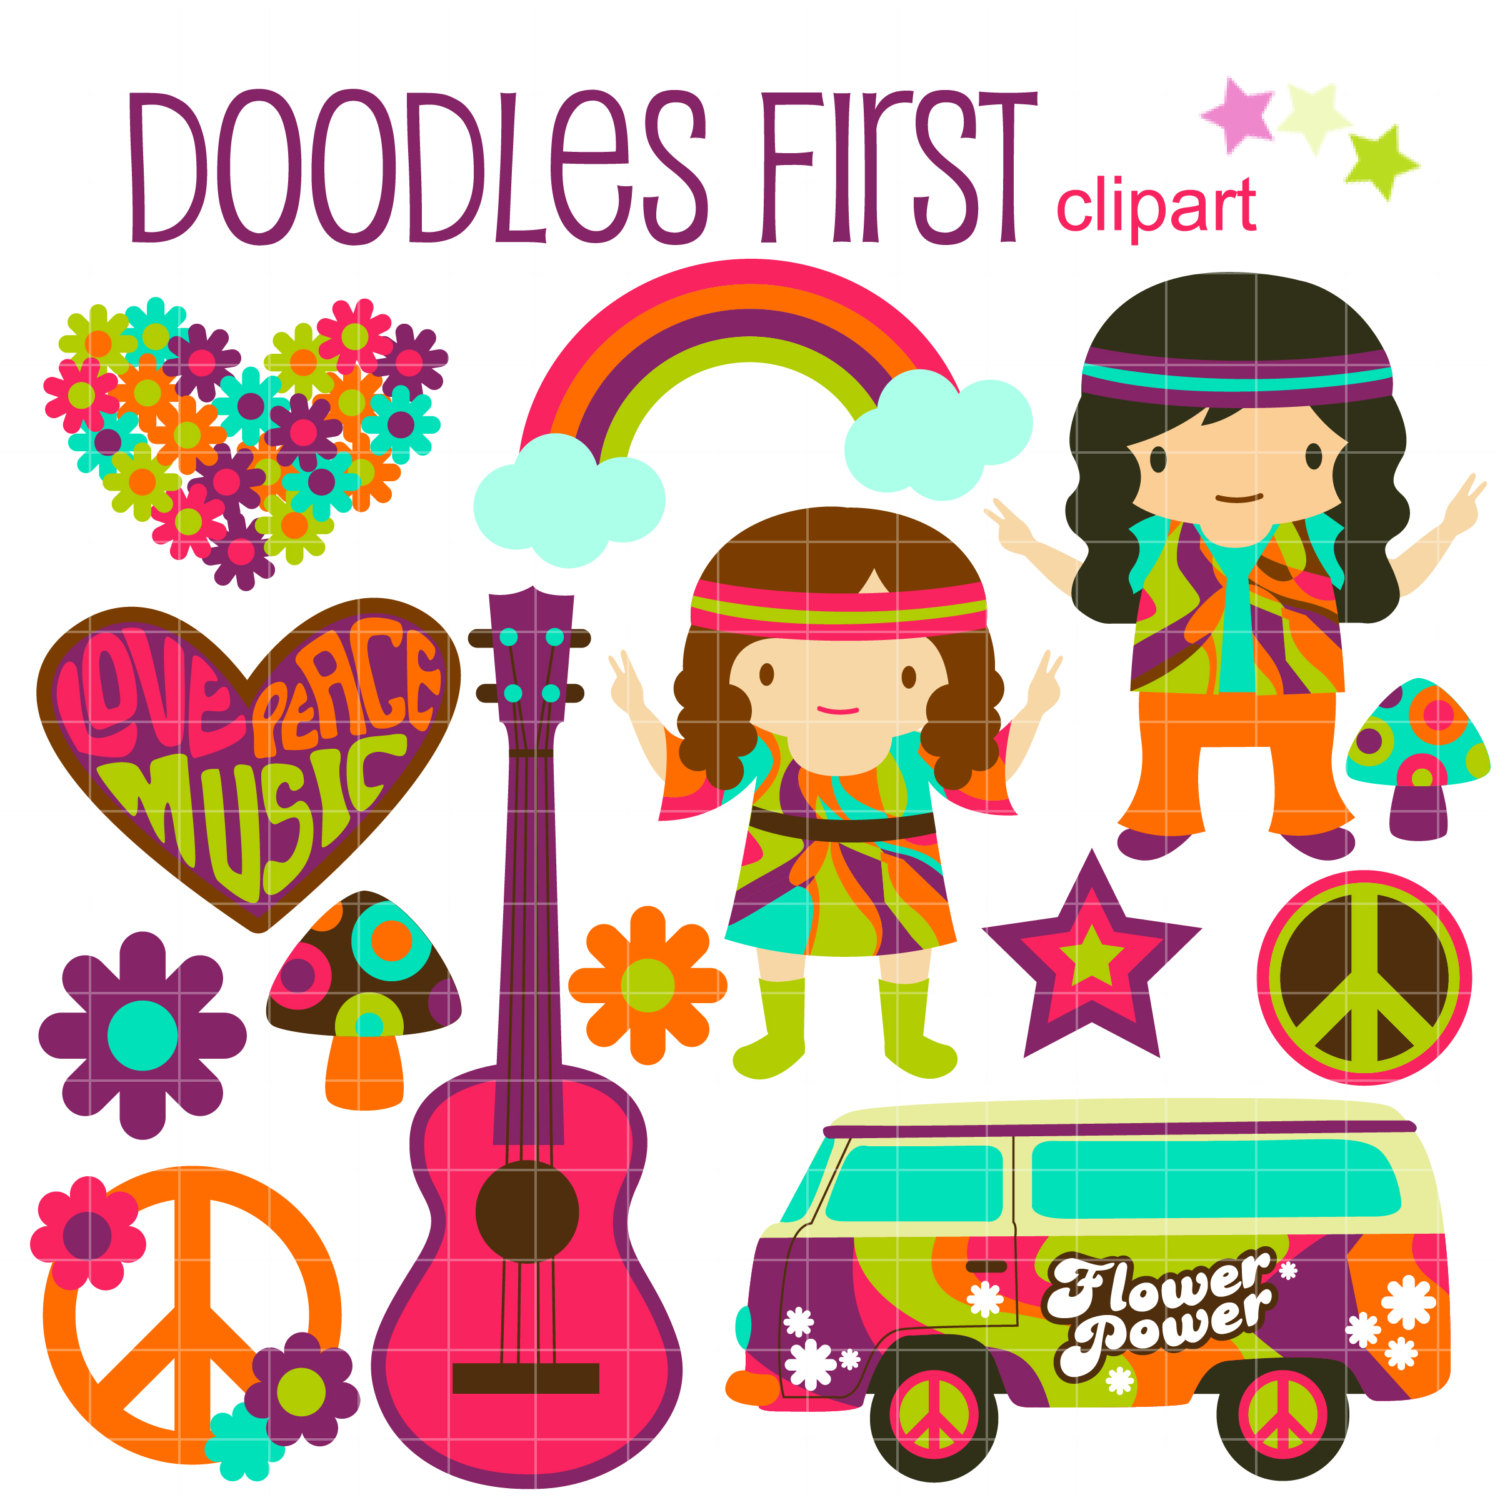 Retro Hippie 70 S Digital Clip Art For By Doodlesfirst On Etsy